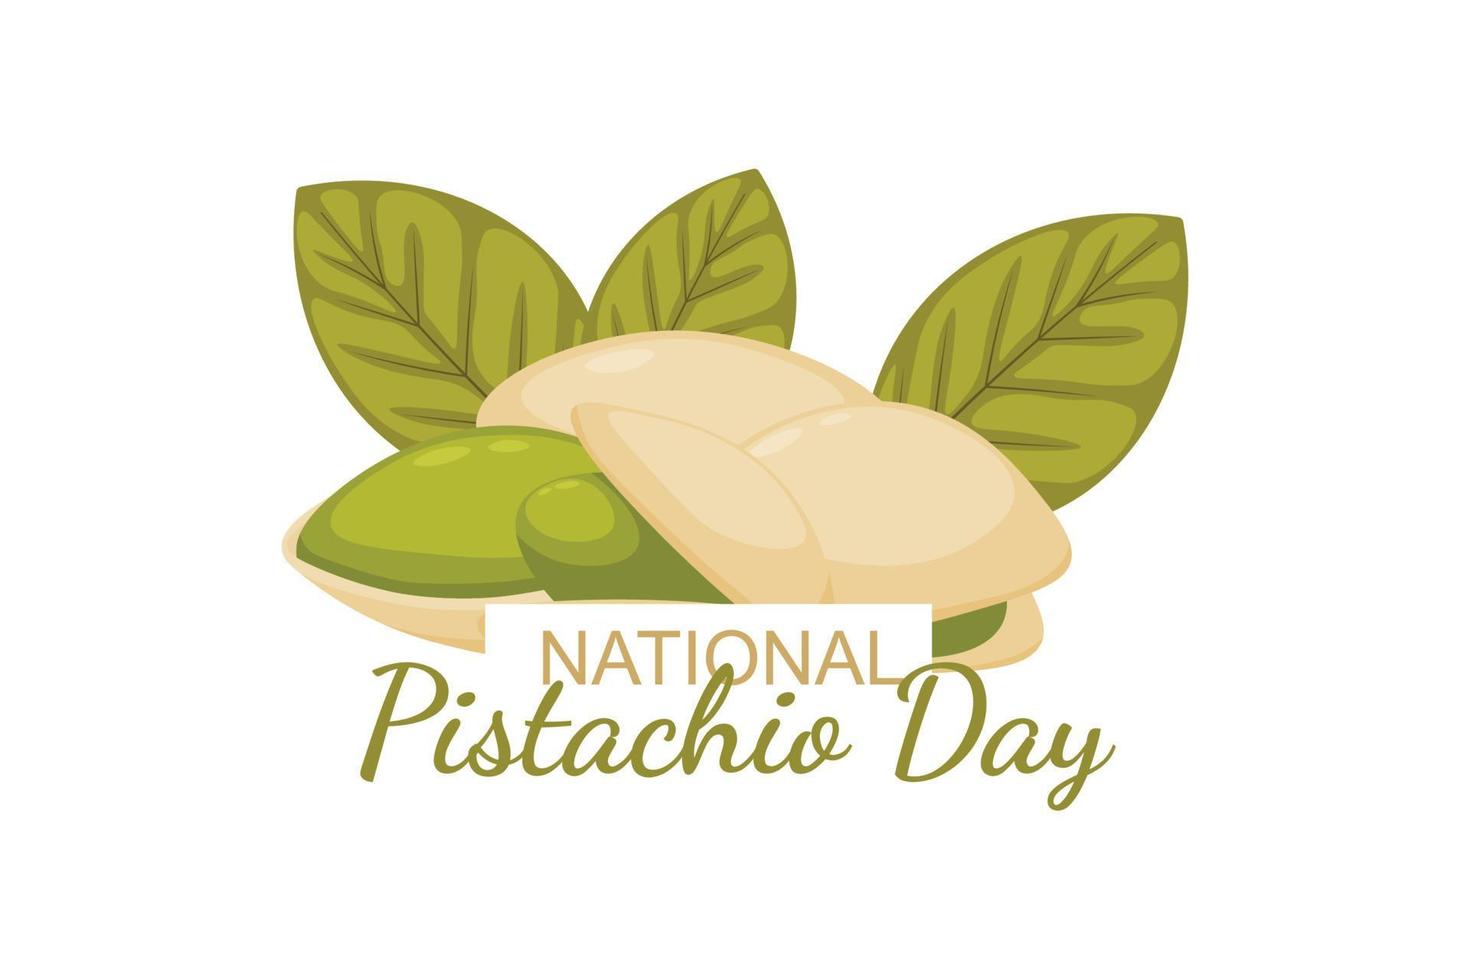 National Pistachio Day background. vector